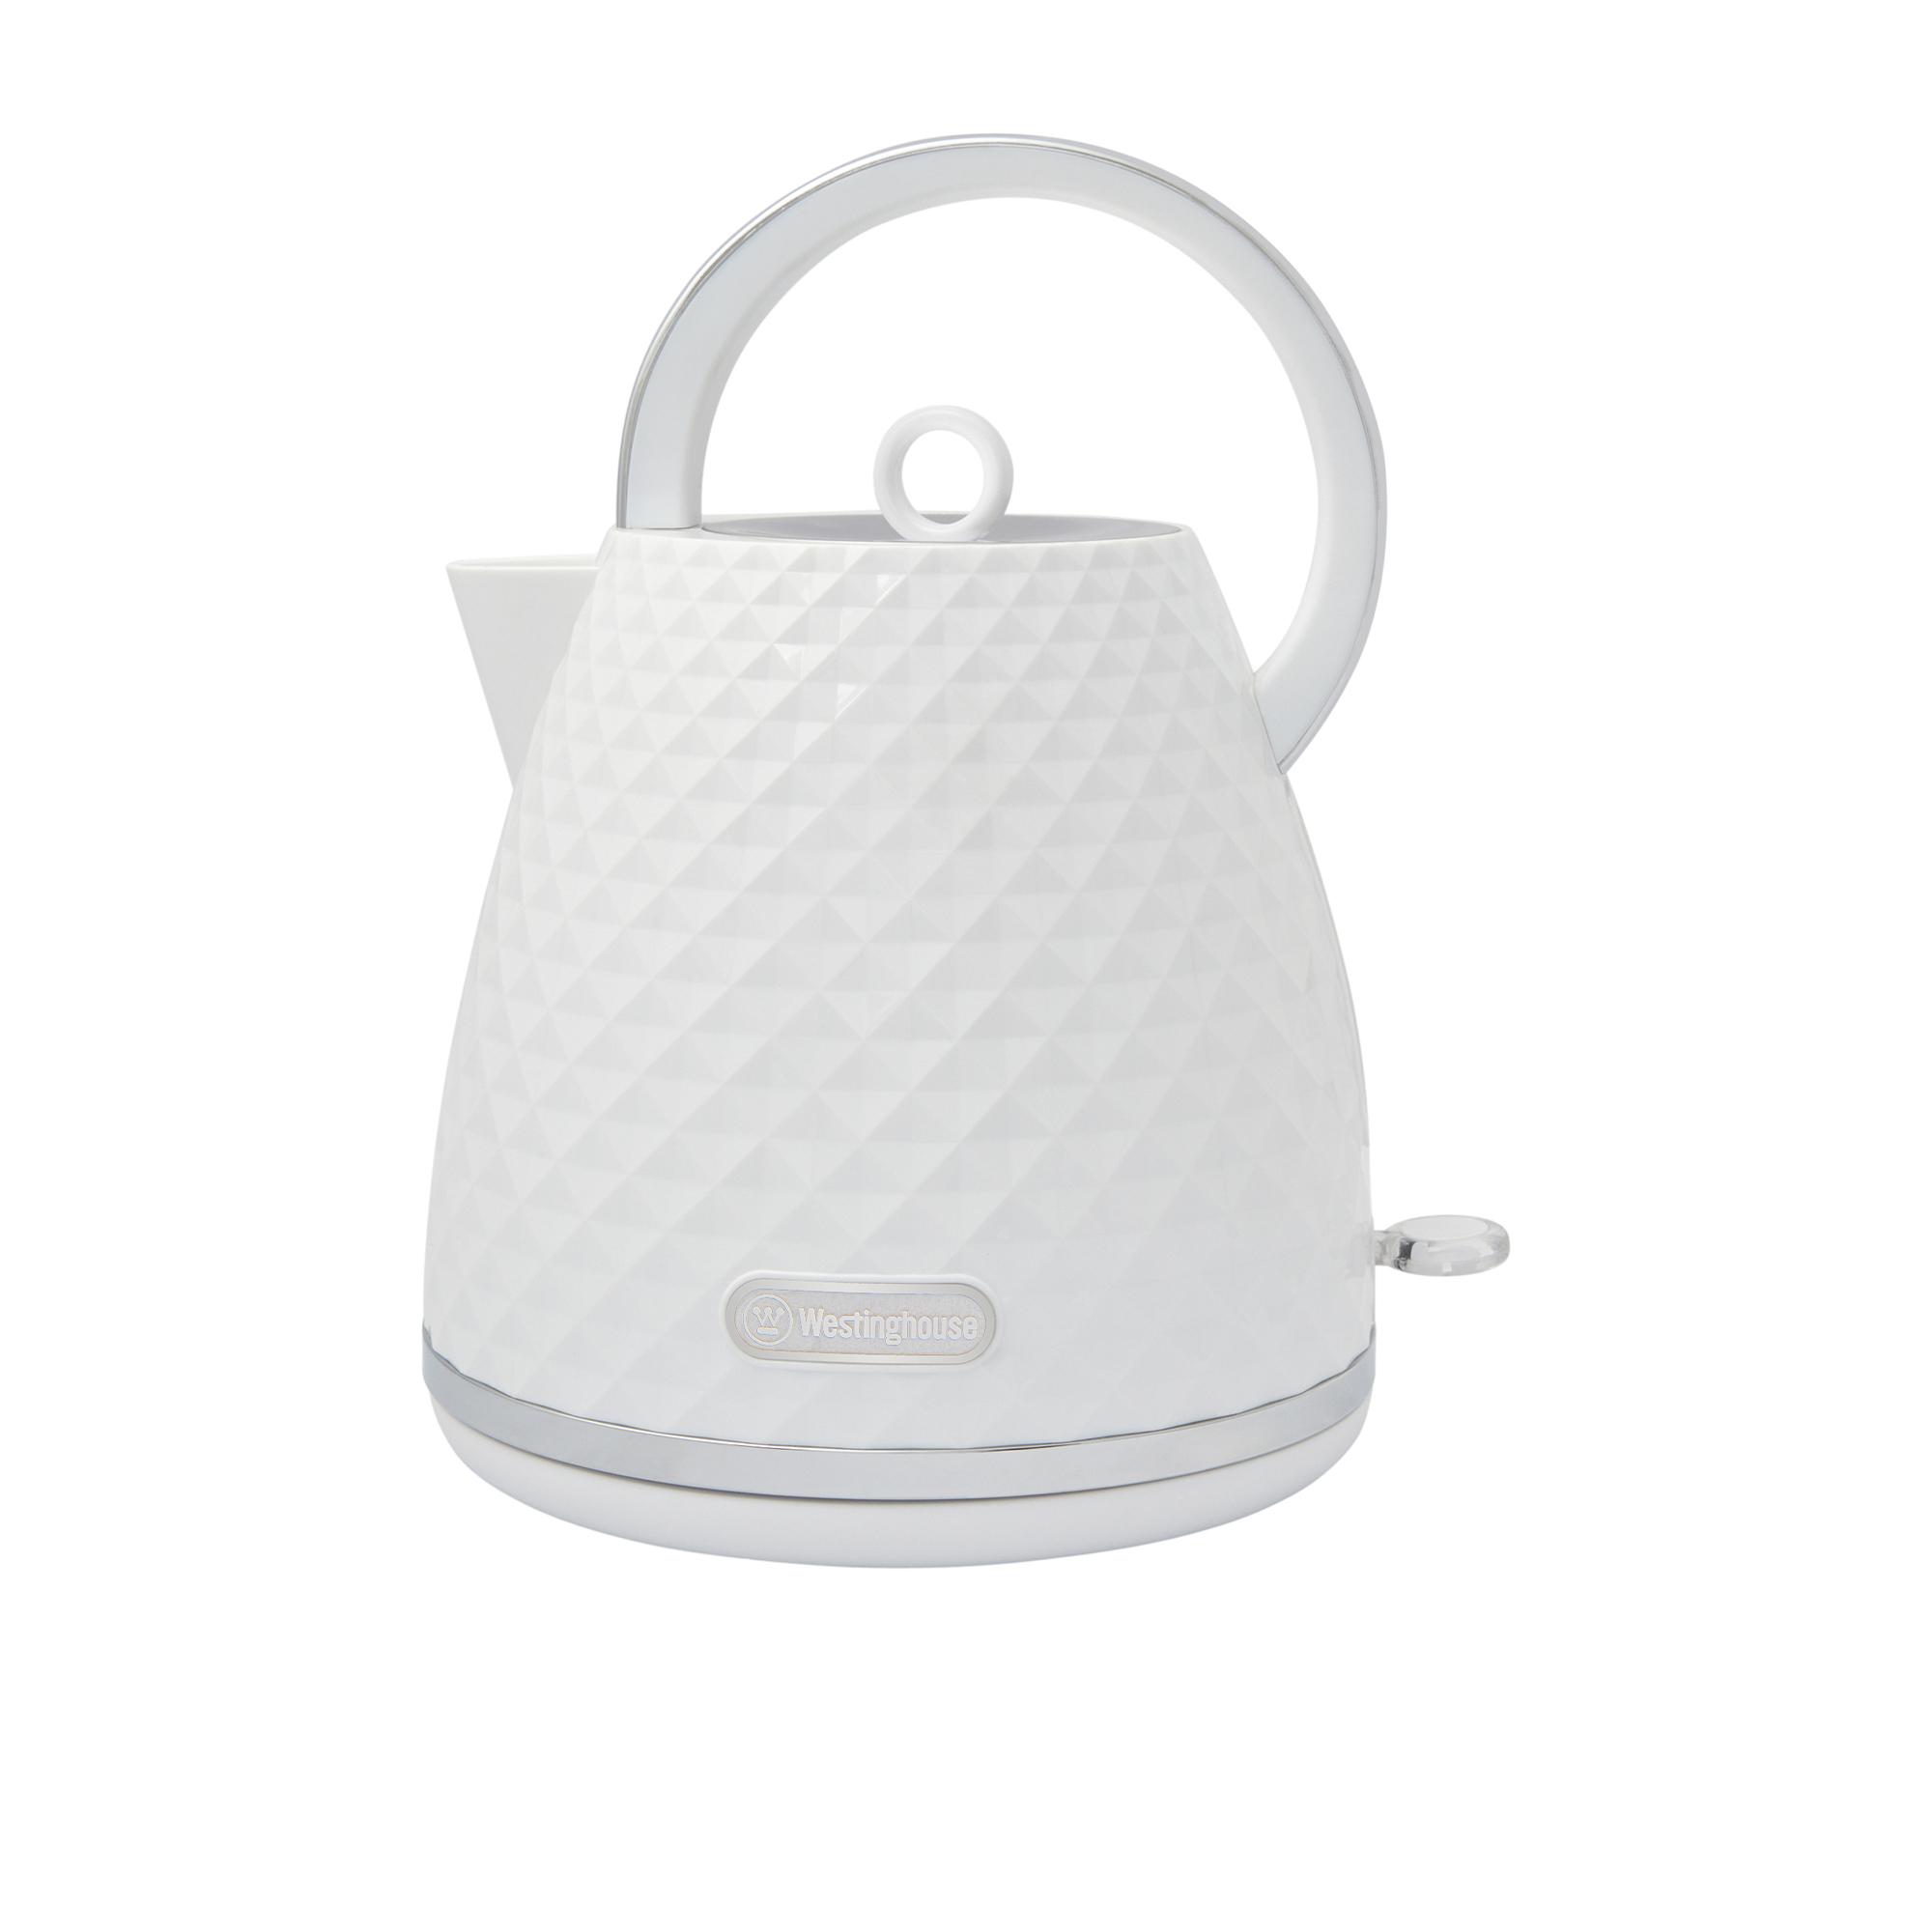 Westinghouse Kettle and Toaster Pack White - Diamond Pattern Image 3